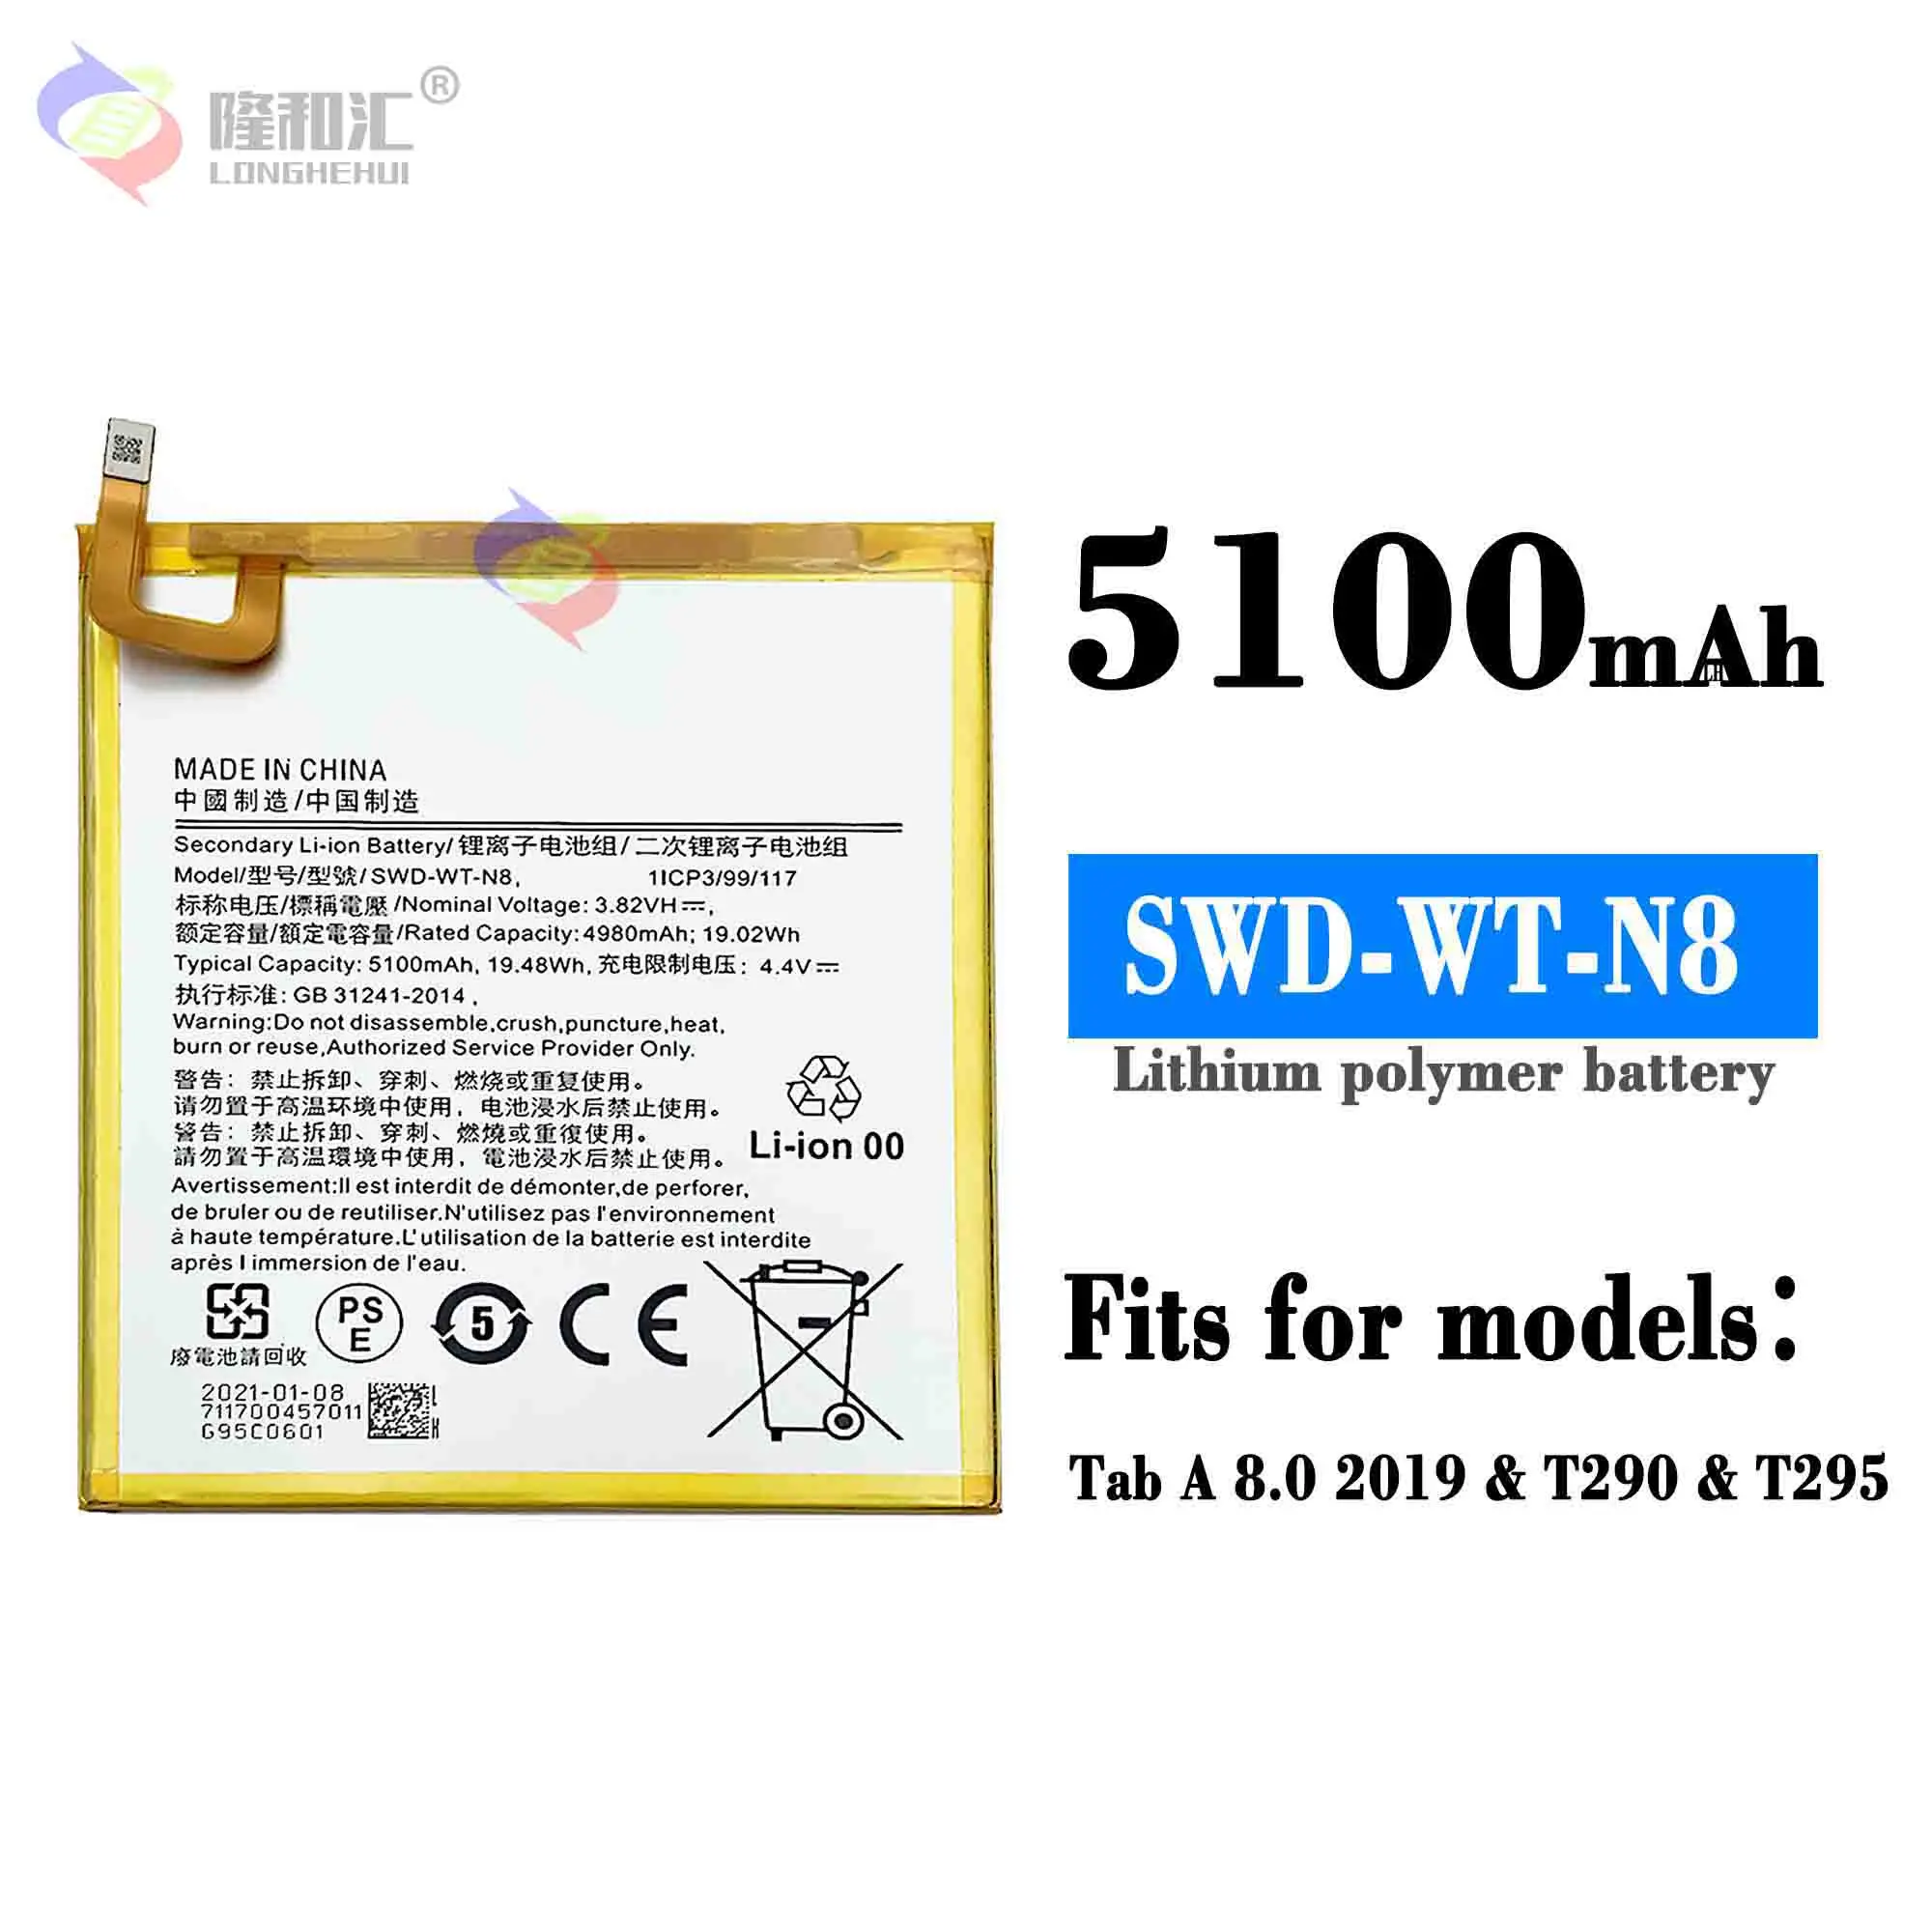 Samsung Original SWD-WT-N8 Tablet Battery For Samsung Galaxy Tab A 8.0 T295 T290 Genuine Replacement Tablet Battery 5100mAh